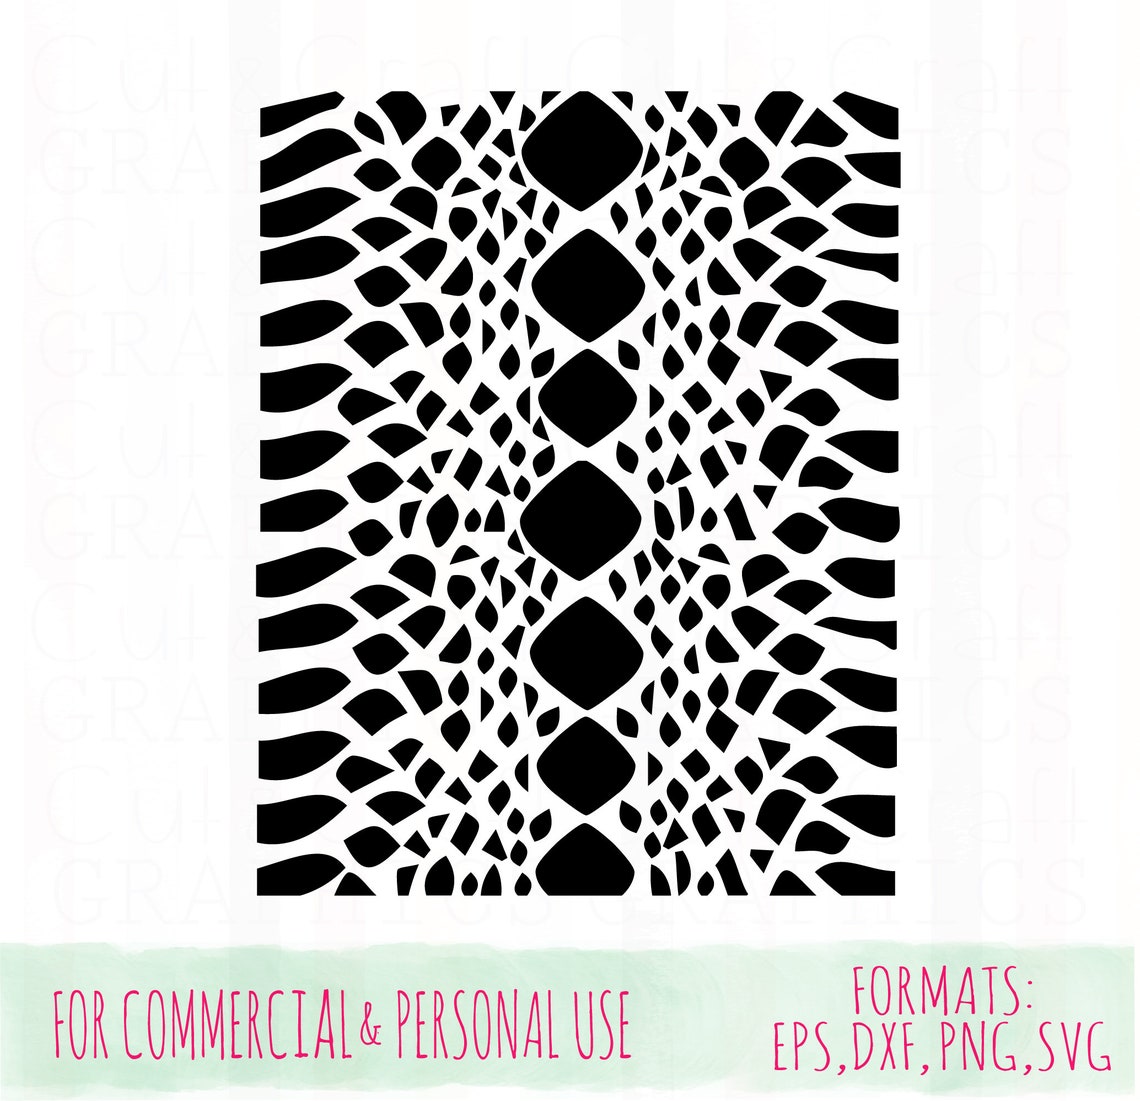 snake-pattern-svgsnake-scales-svg-png-eps-dxfcommercial-and-personal